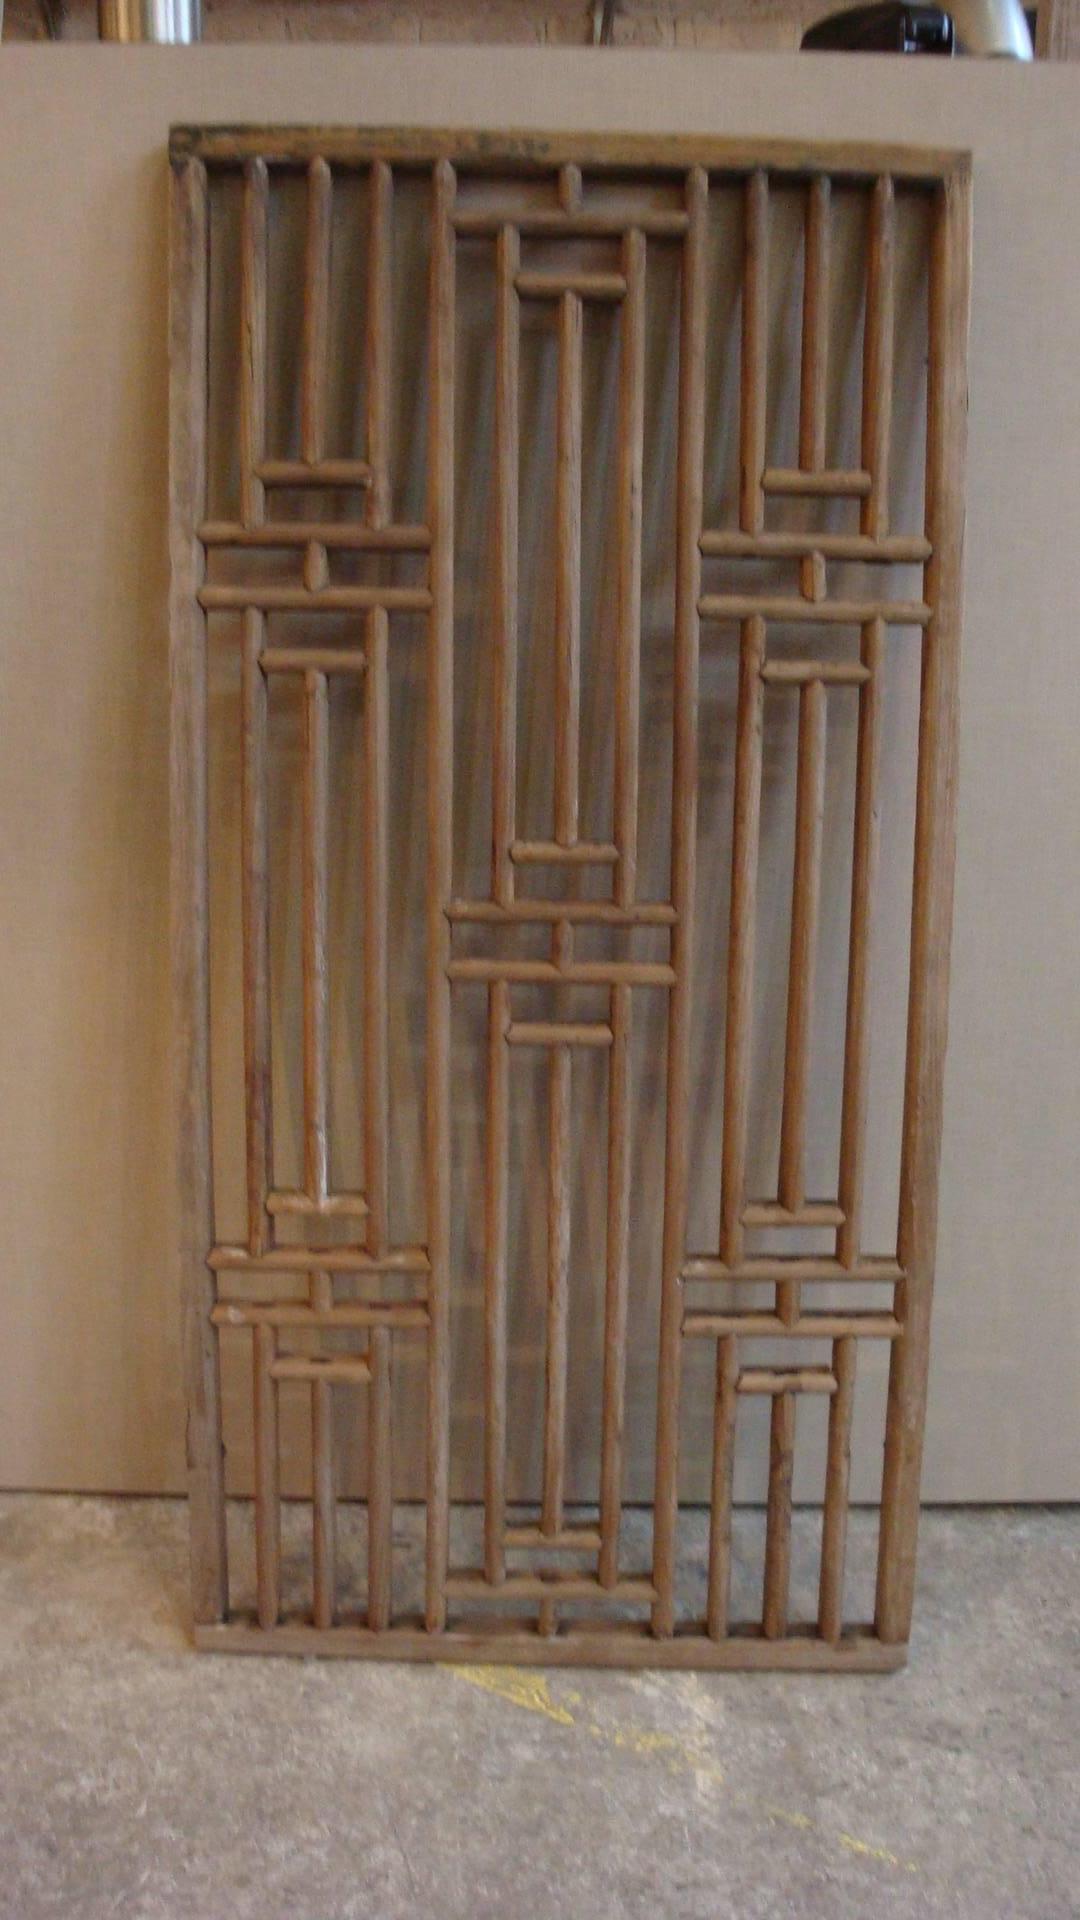 This is a pair of Chinese, circa late 1900 wood window panels in a geometric pattern.